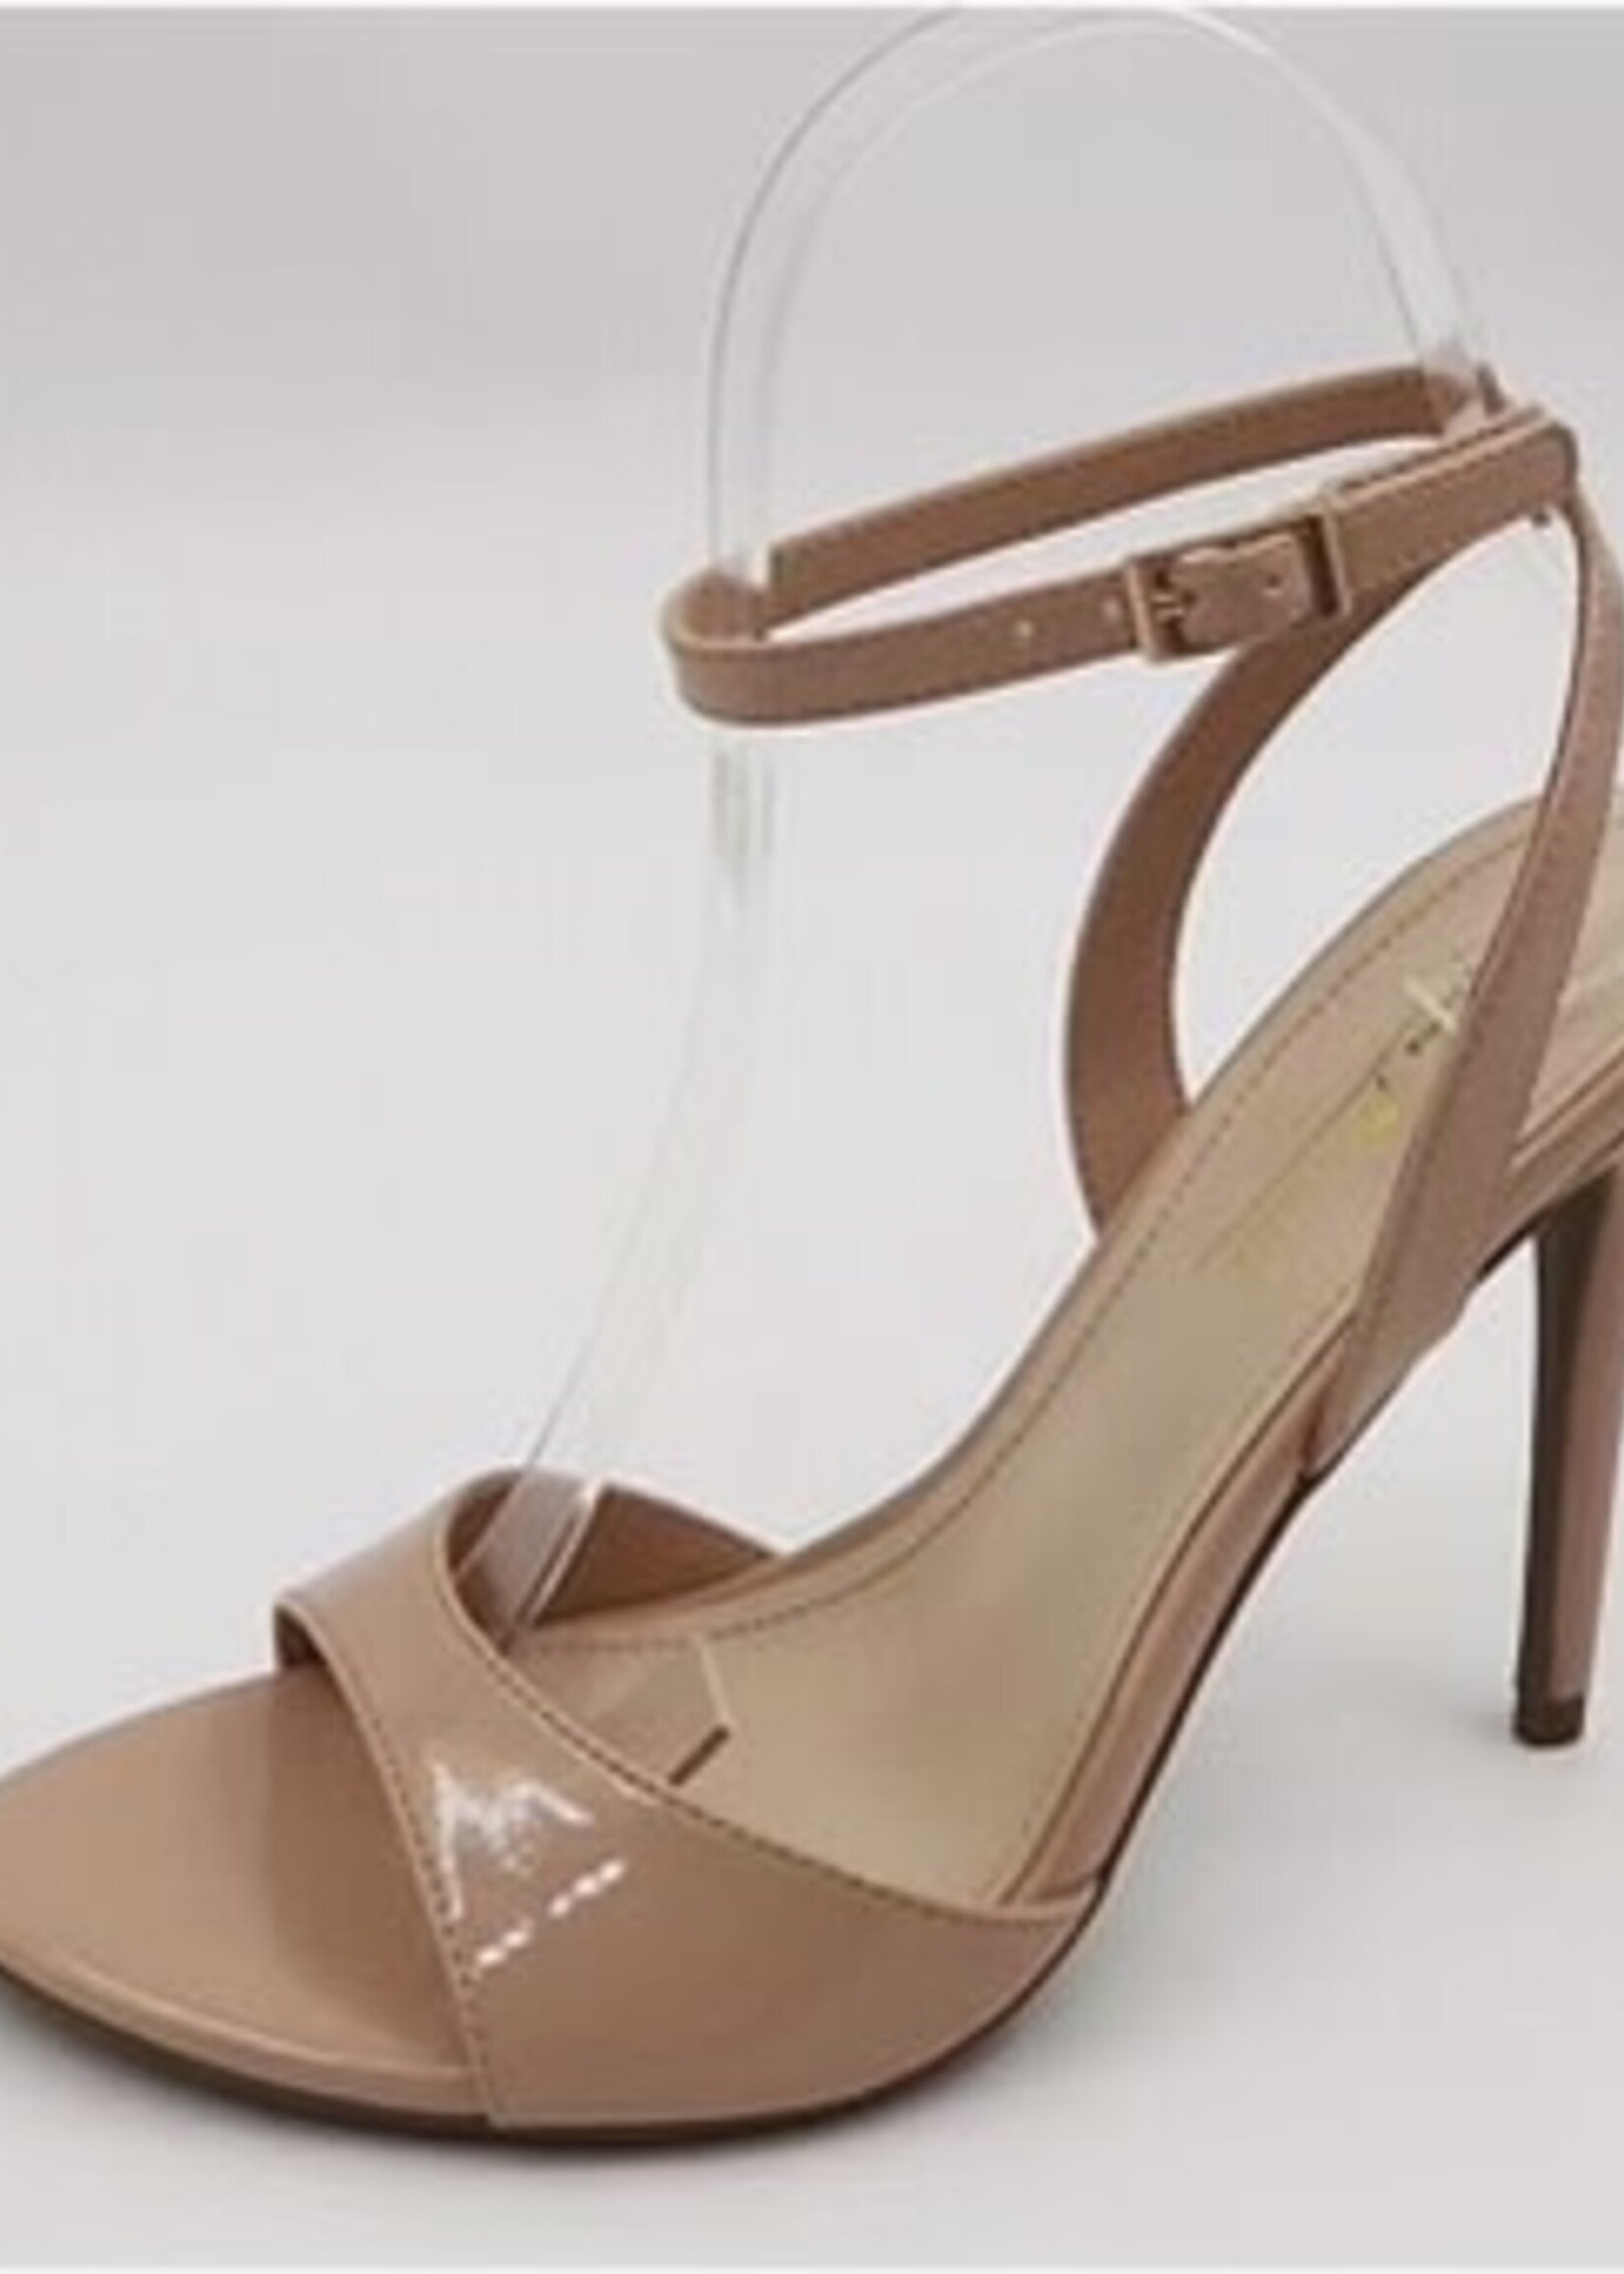 Bloom and Company Nude Patent Leather Strappy Heel